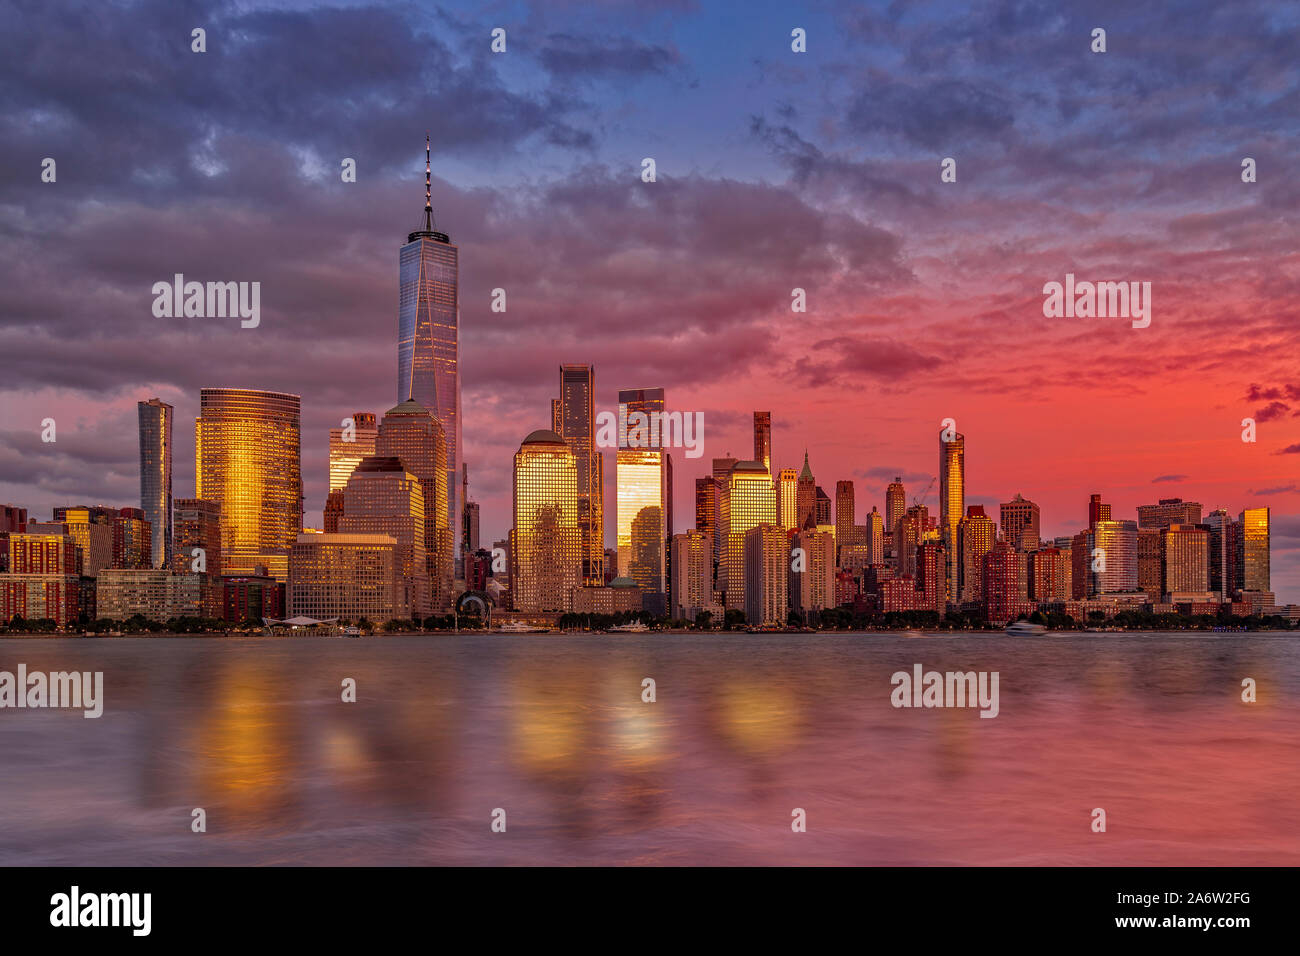 NYC Skyline Sundown - The sun sets by One World Trade Center, coined the Freedom Tower in the lower Manhattan skyline in New York City. Stock Photo